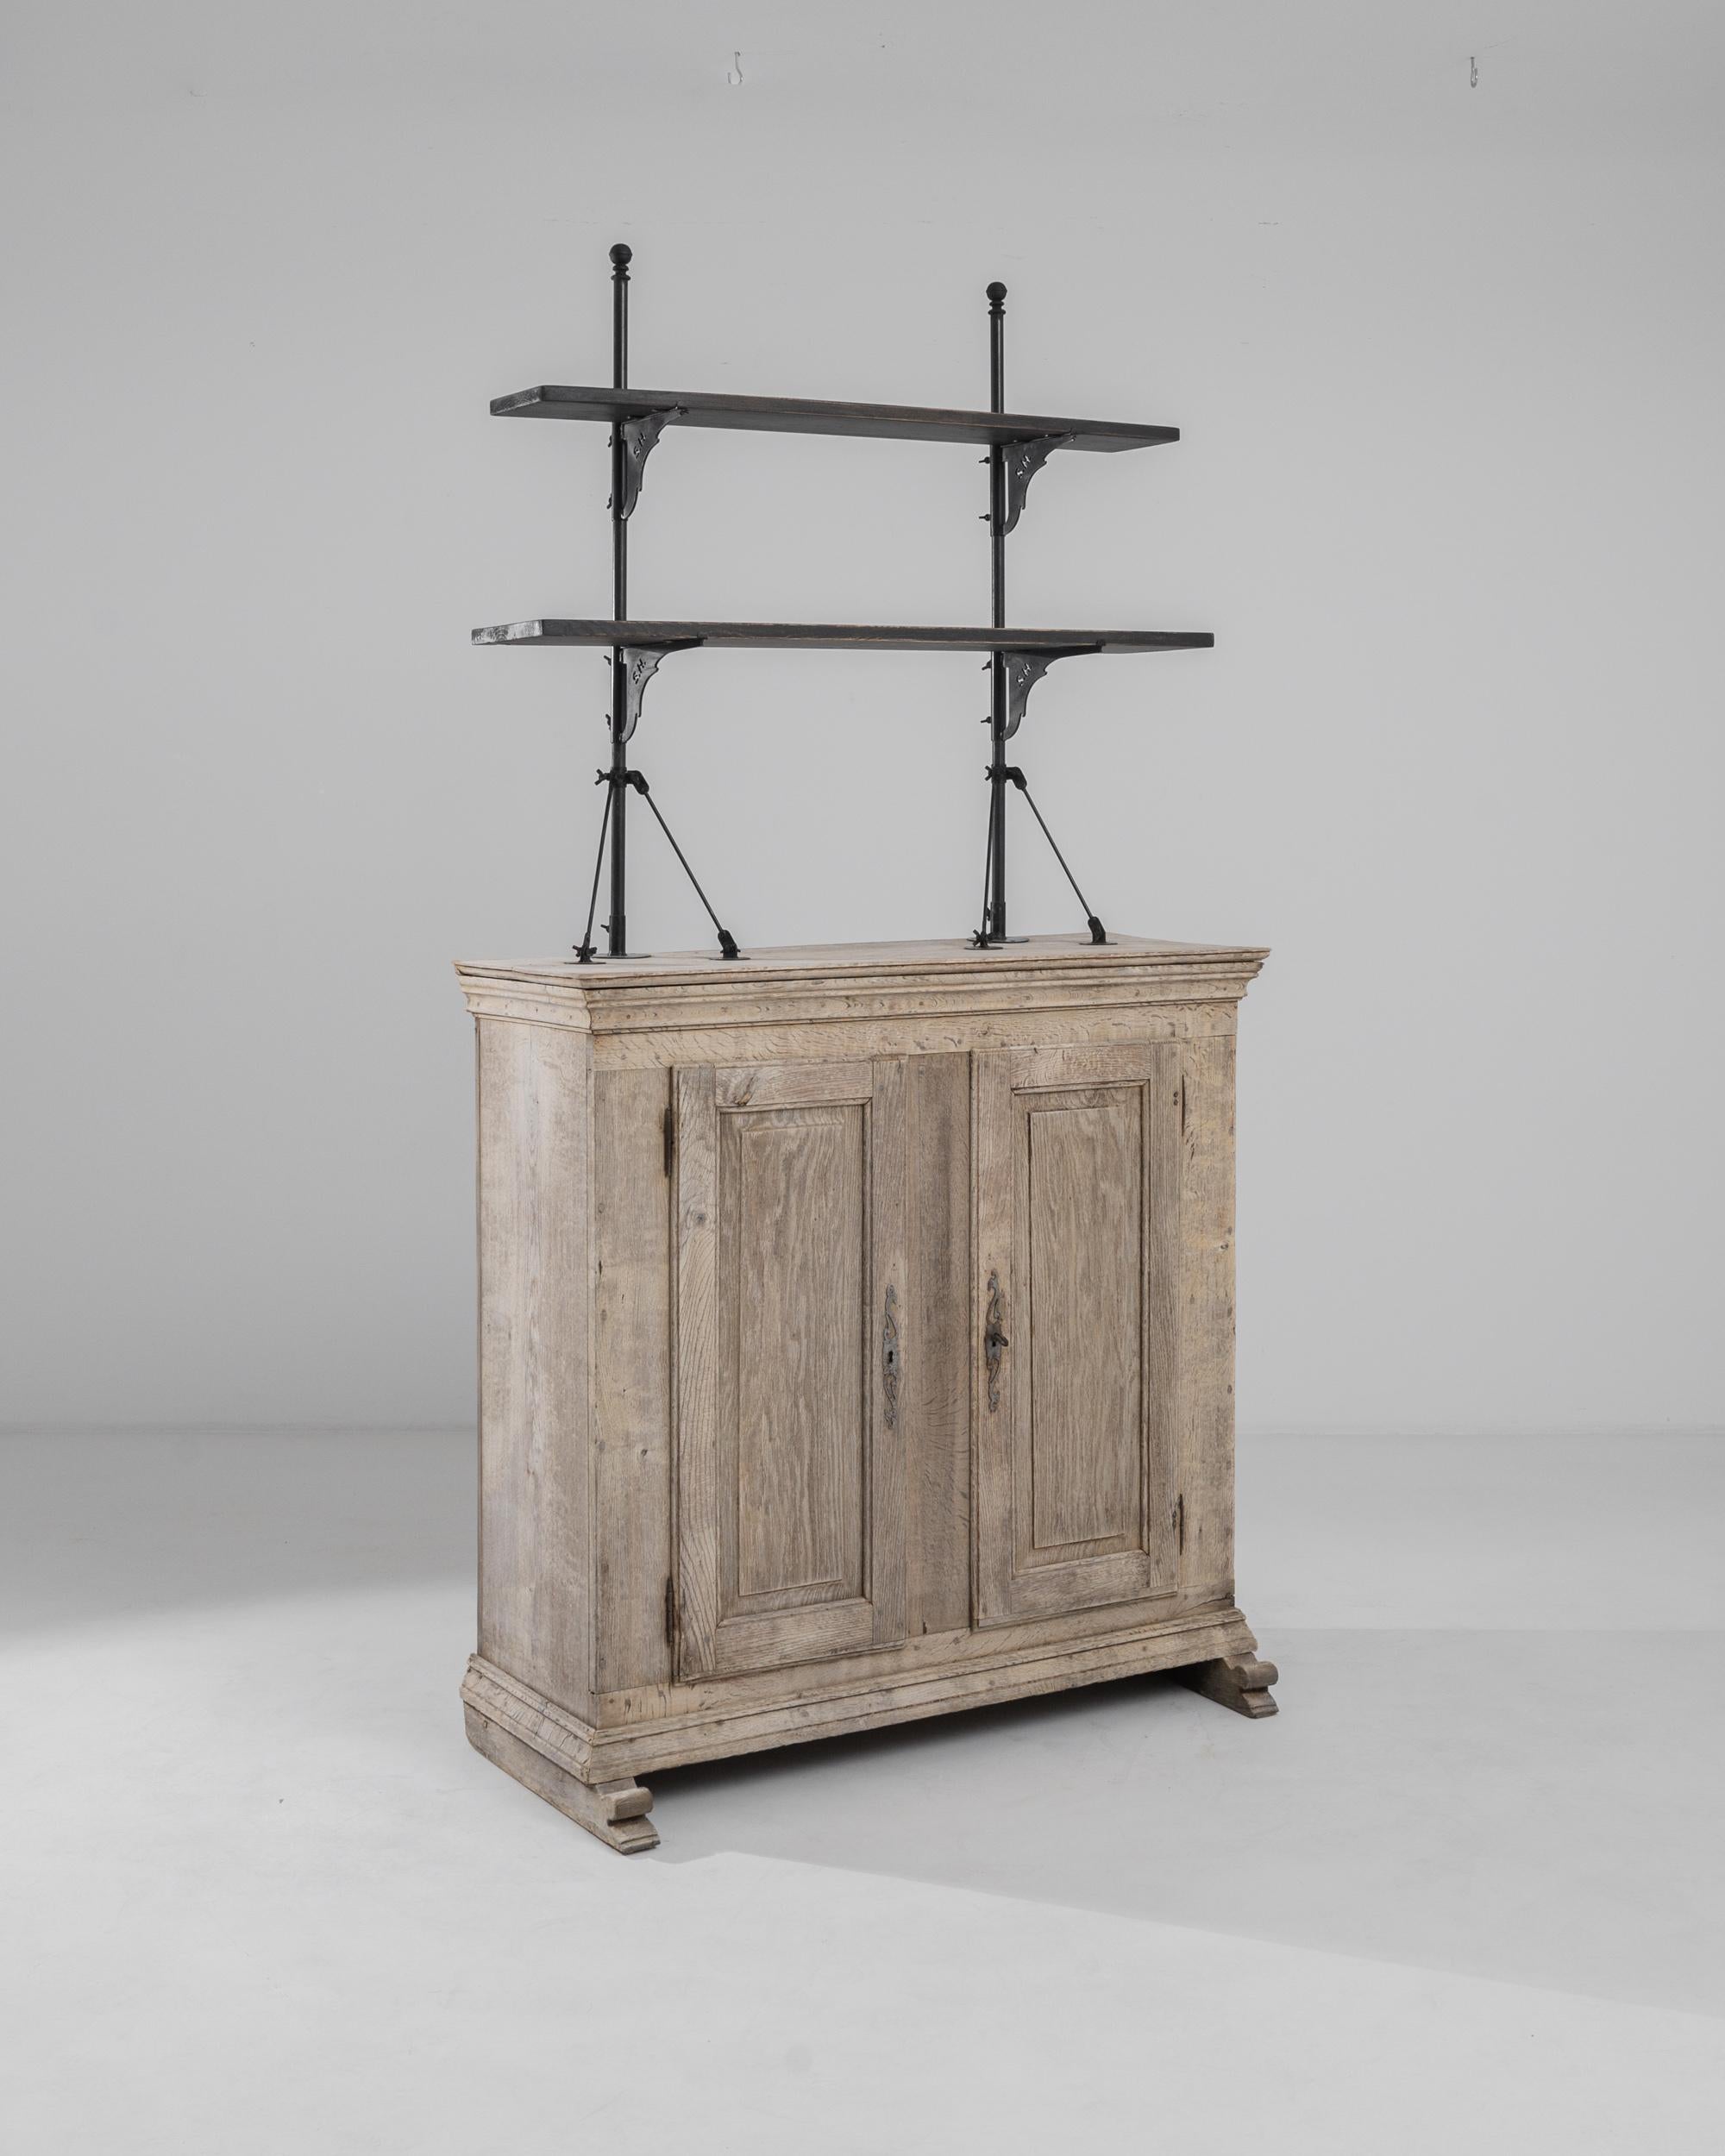 Made in France in the 19th century, this antique oak display cabinet offers a unique and practical silhouette. Two raised shelves are set upon slender metal posts to create an unobtrusive, pared-back open storage concept. The elegant shape of the